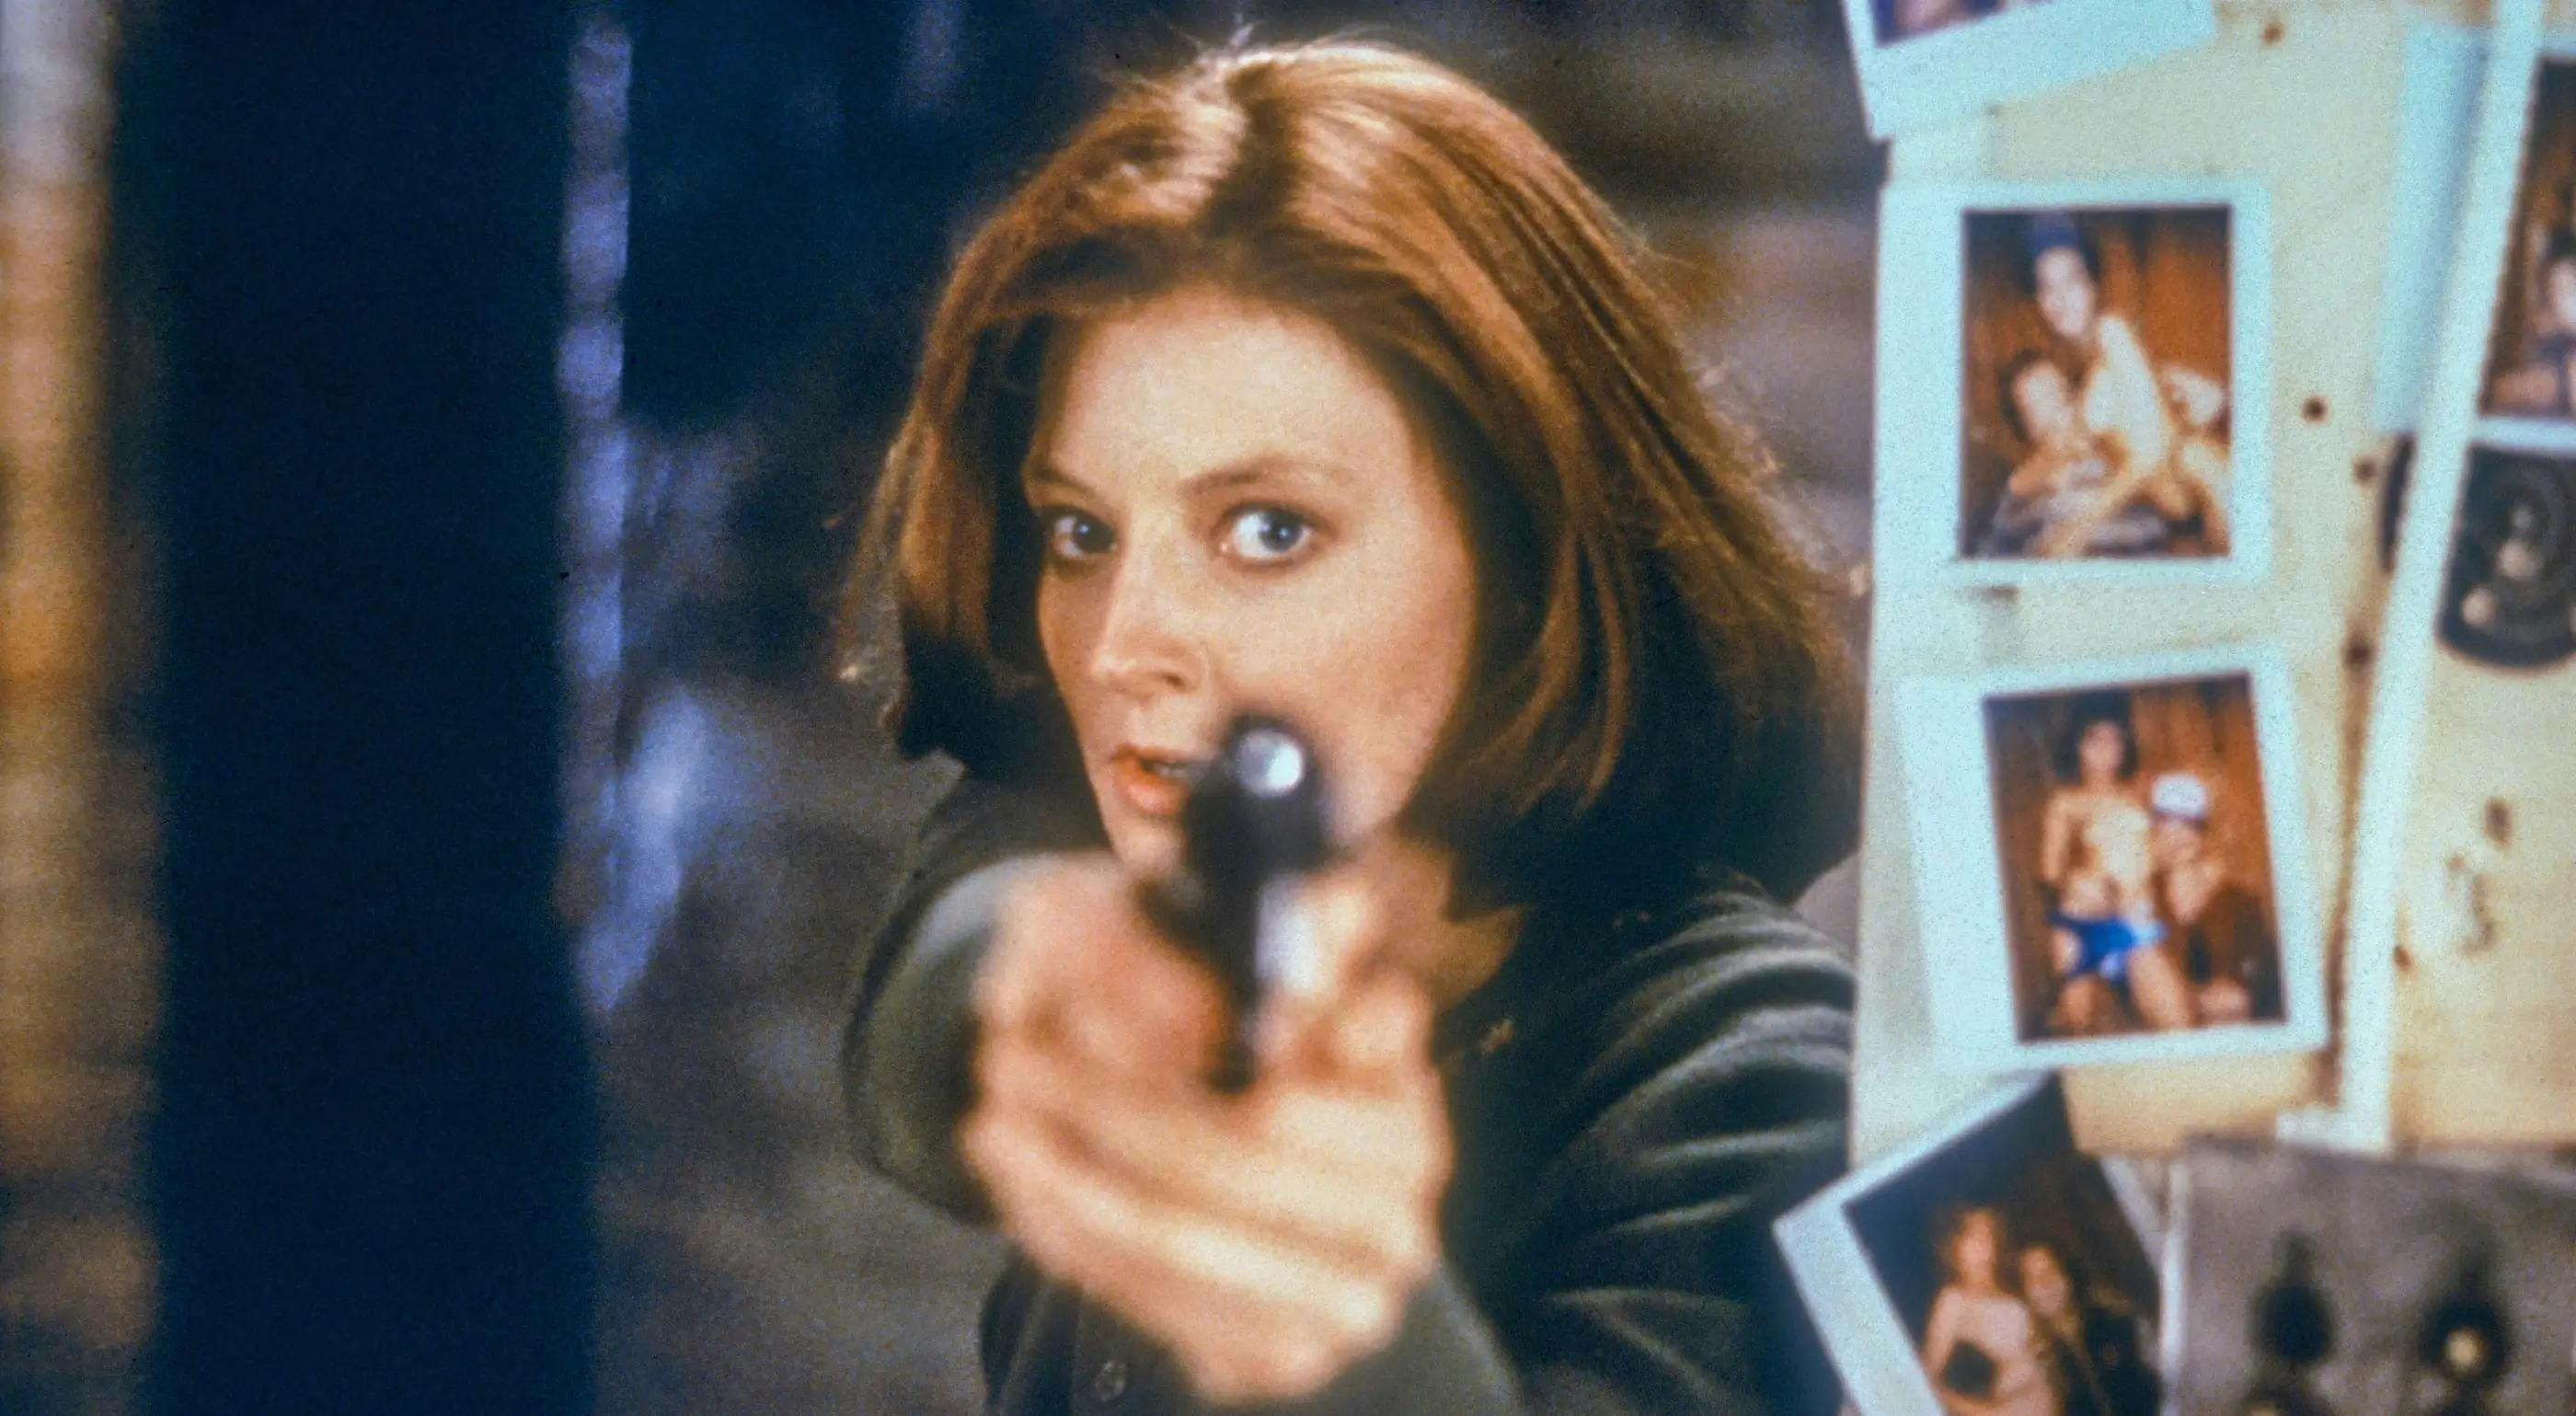 Personality type of Clarice Starling